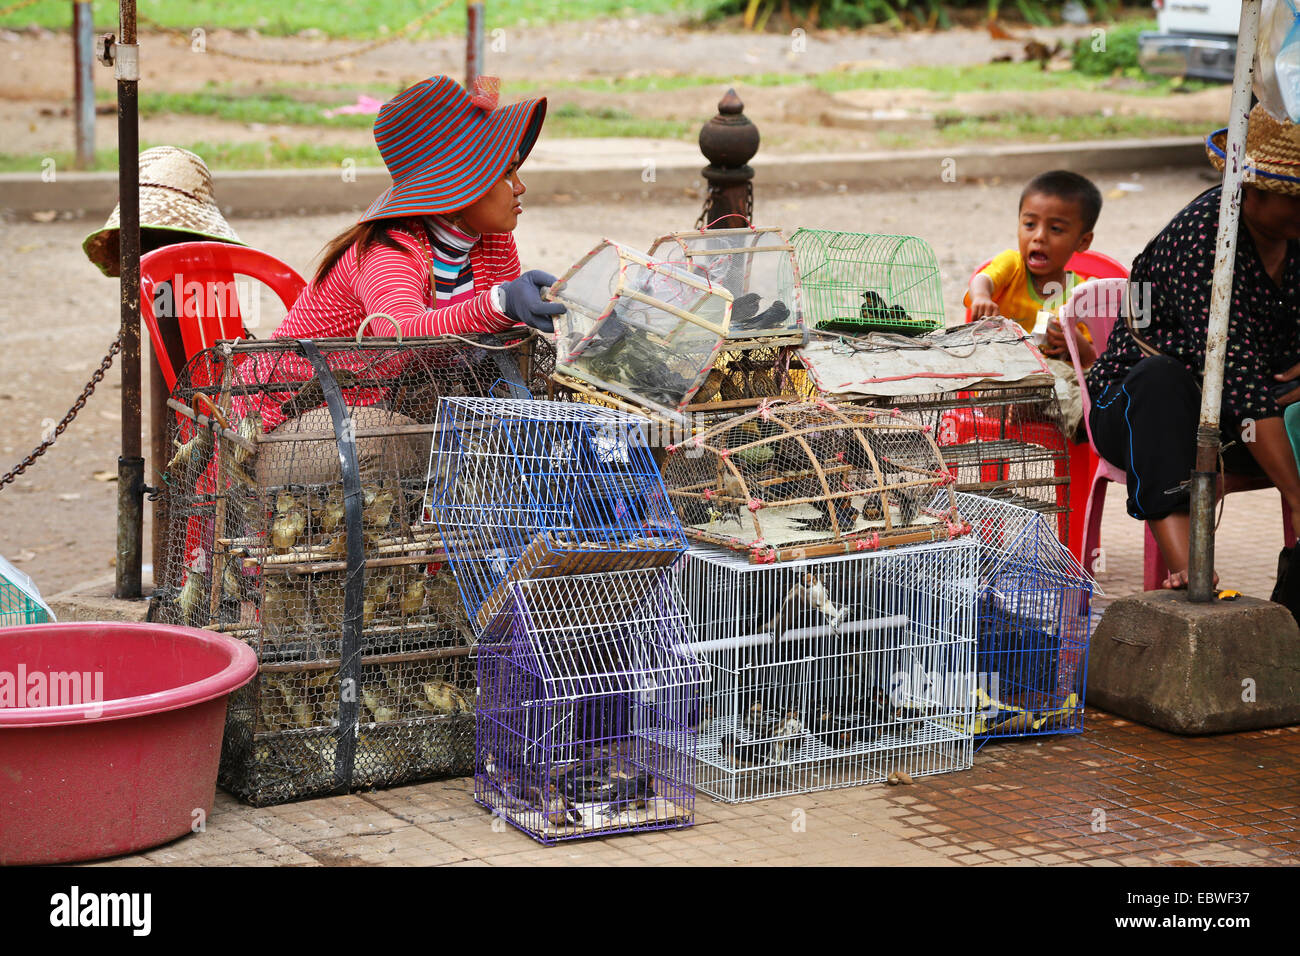 Street scene with people selling birds in cages for temple offerings, Siem Reap, Cambodia. Stock Photo